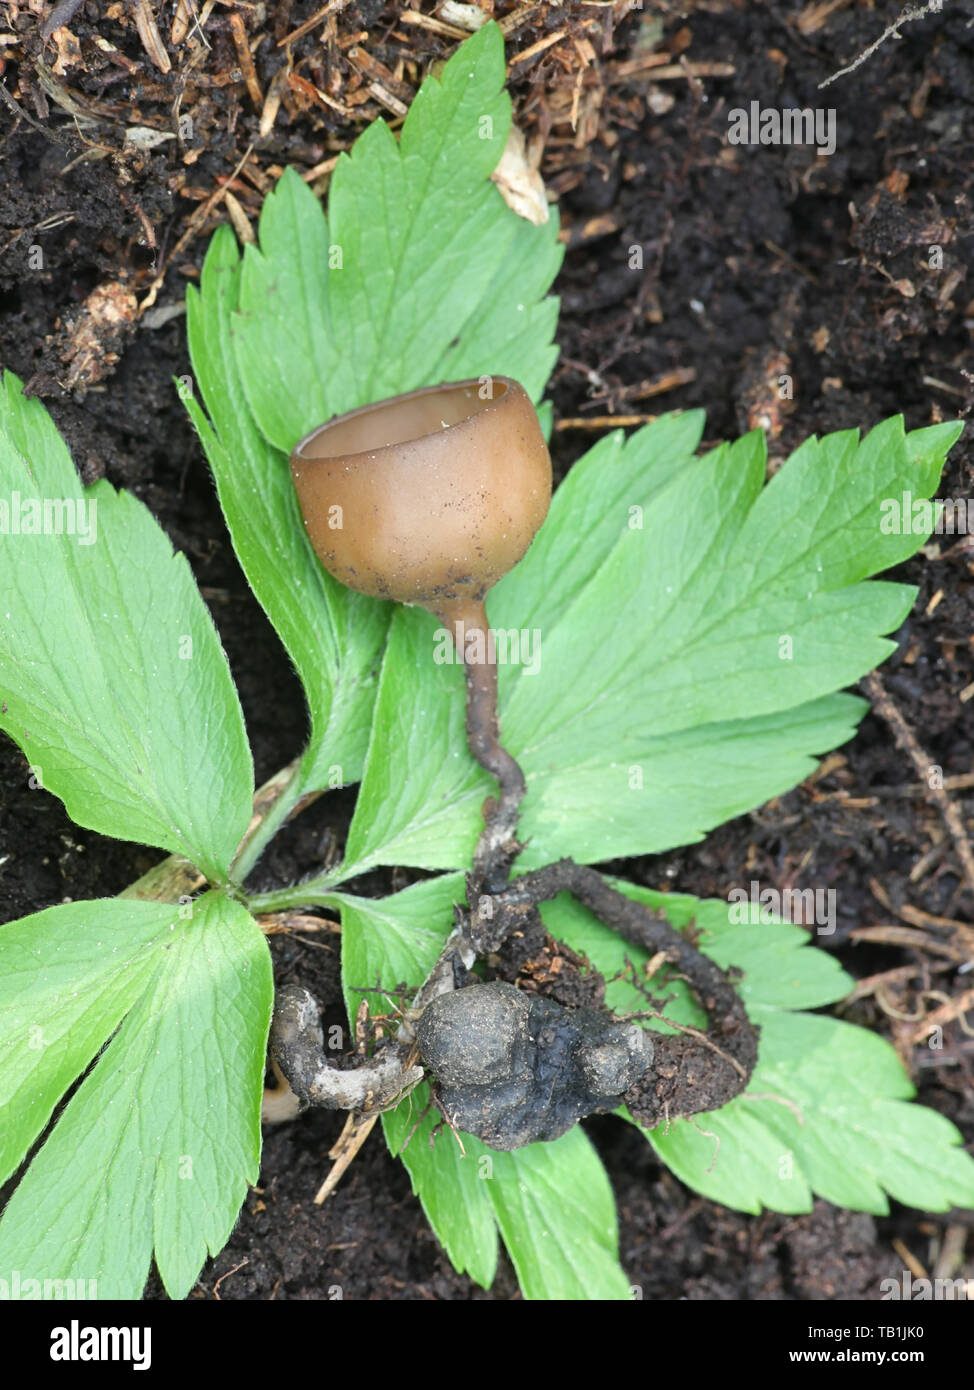 Dumontinia tuberosa, known as the anemone cup, wild fungus from Finland Stock Photo